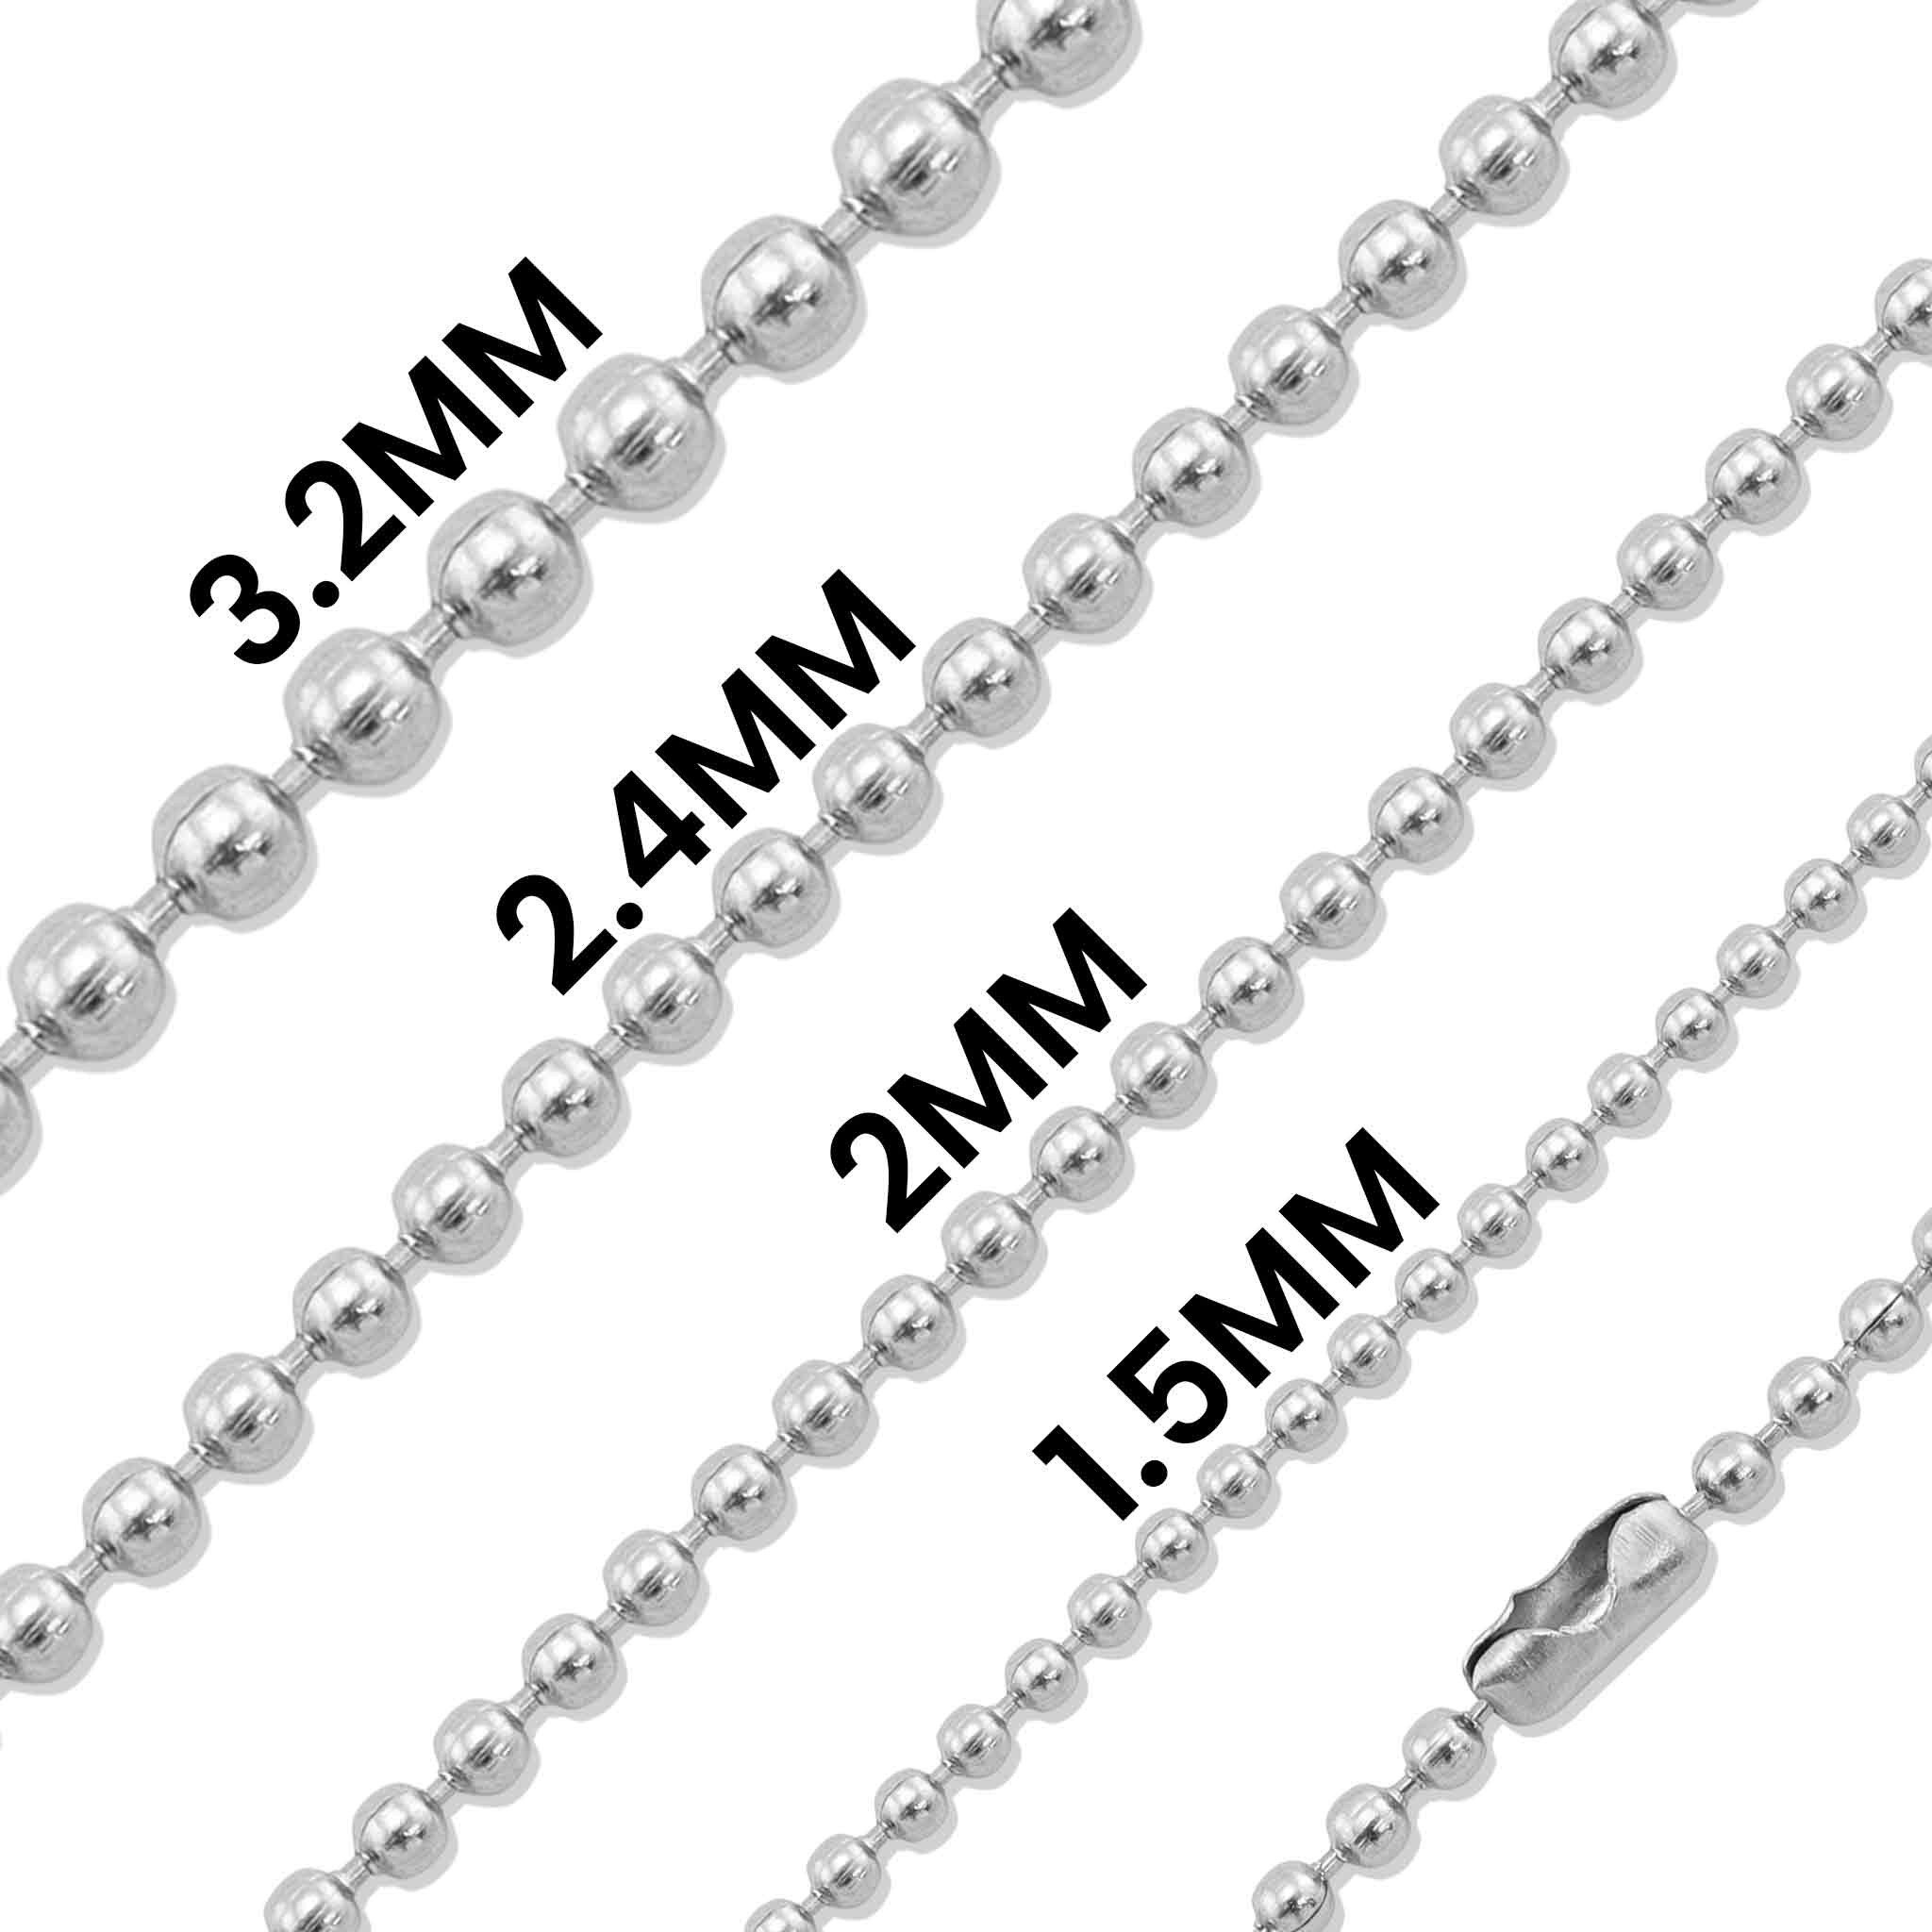 Necklaces Stainless Steel Ball Bead Chain Chj2069 1.5mm / 16 Wholesale Jewelry Website Unisex